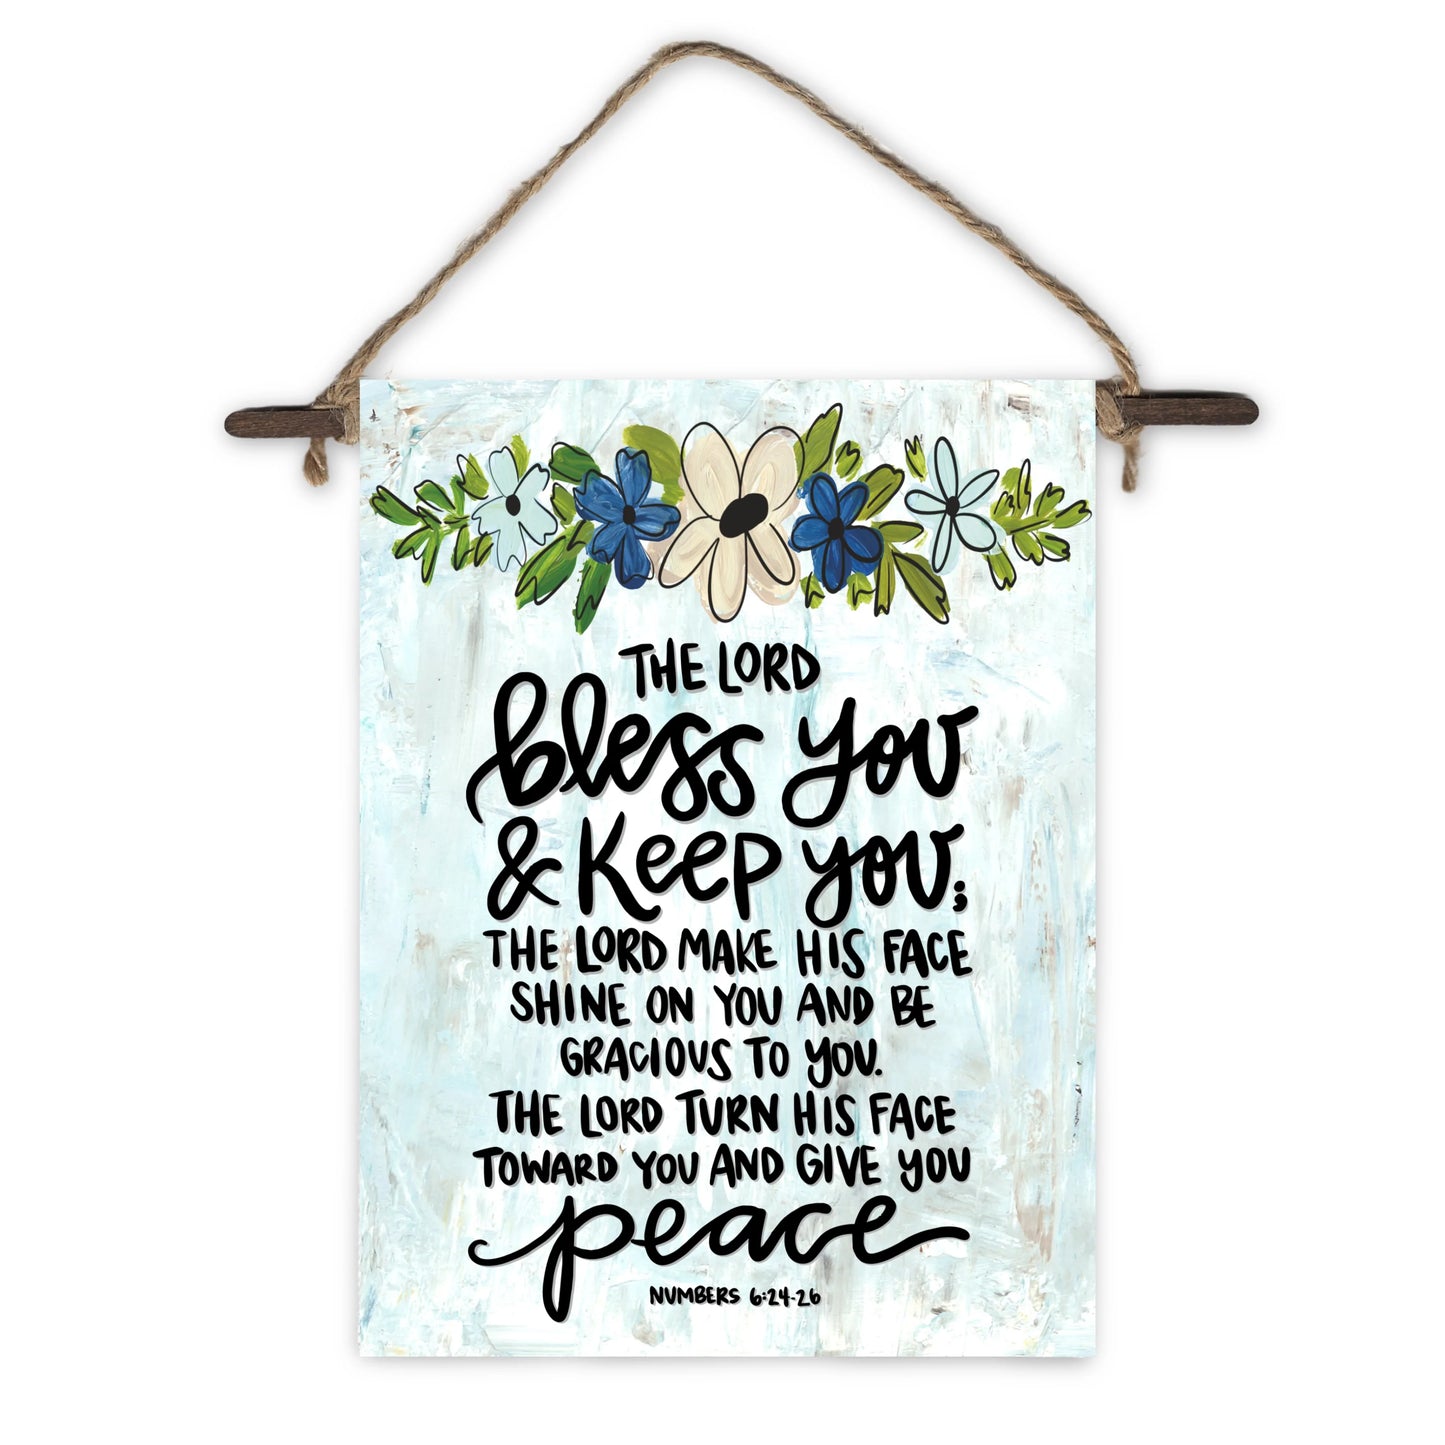 The Lord Bless You Mini Wall Hanging